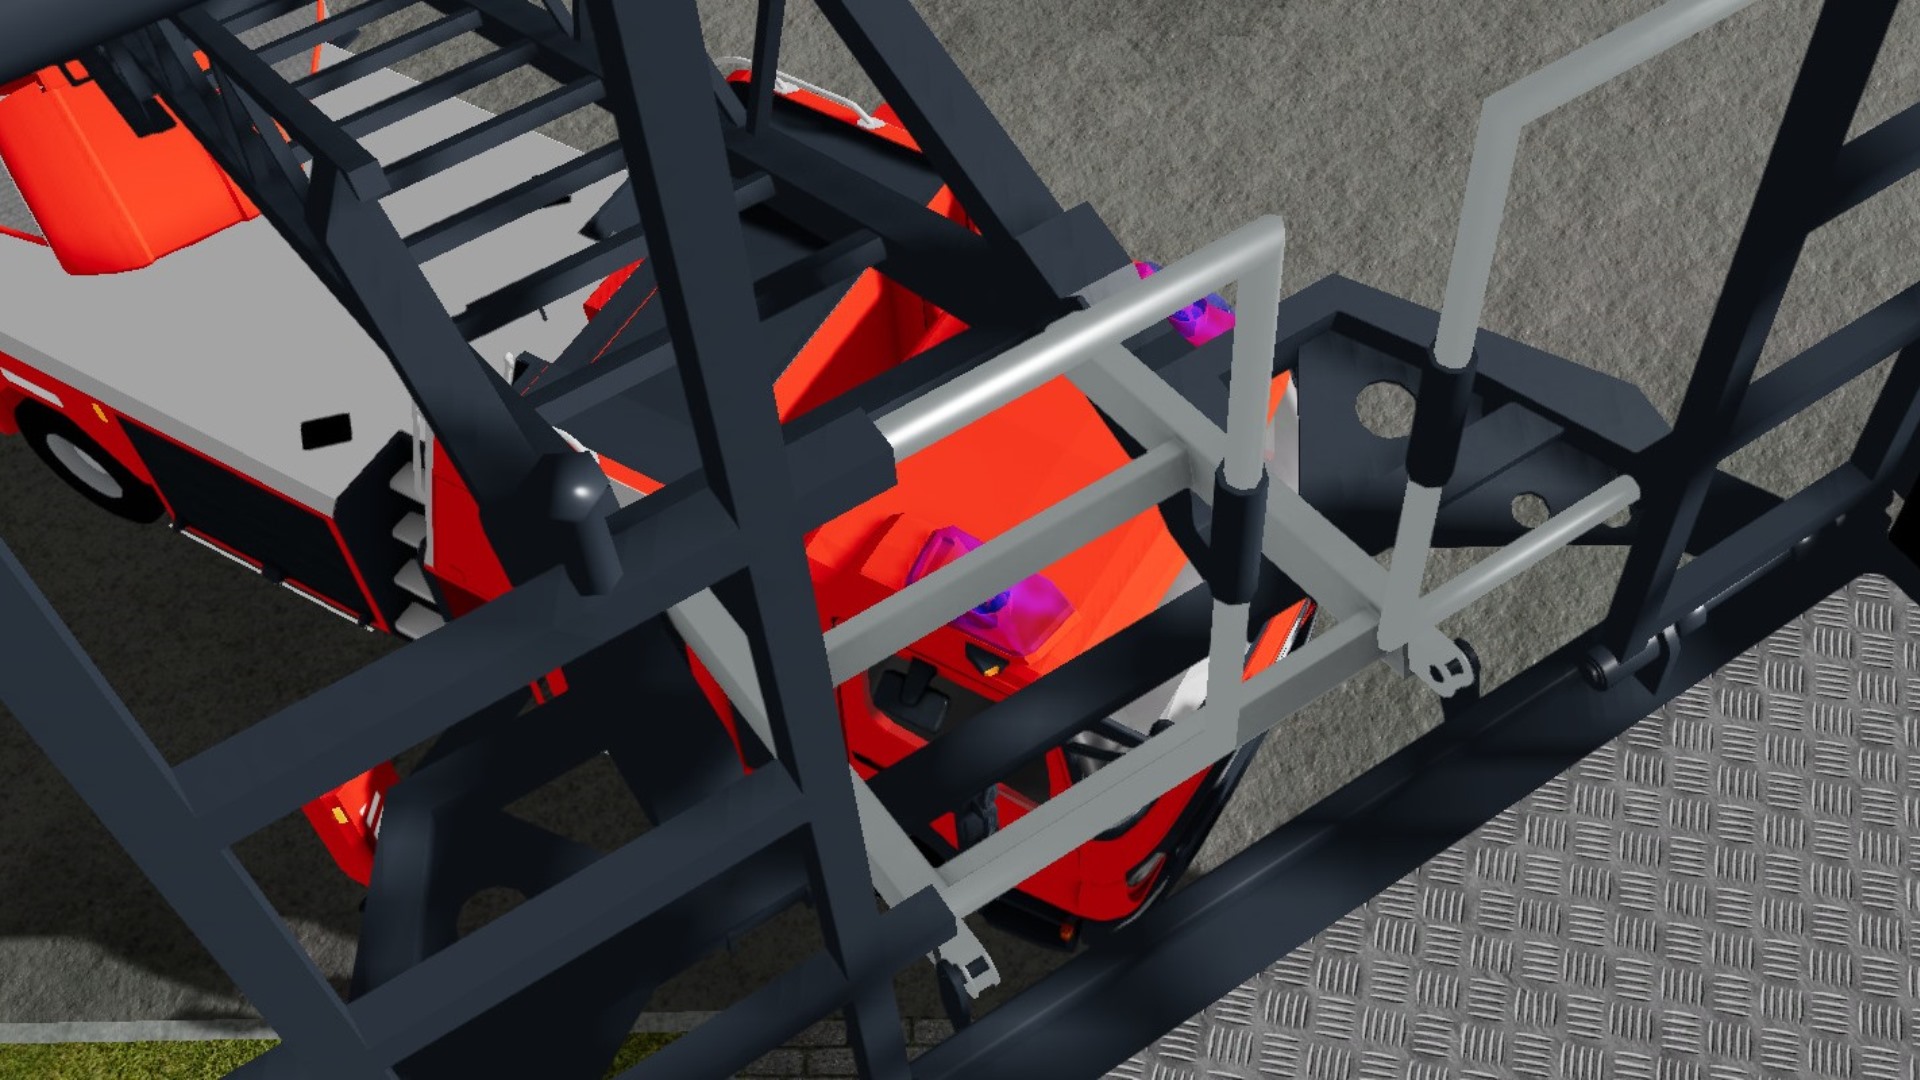 A Trainee's virtual reality view looking down at the aerial ladder truck from the basket.  